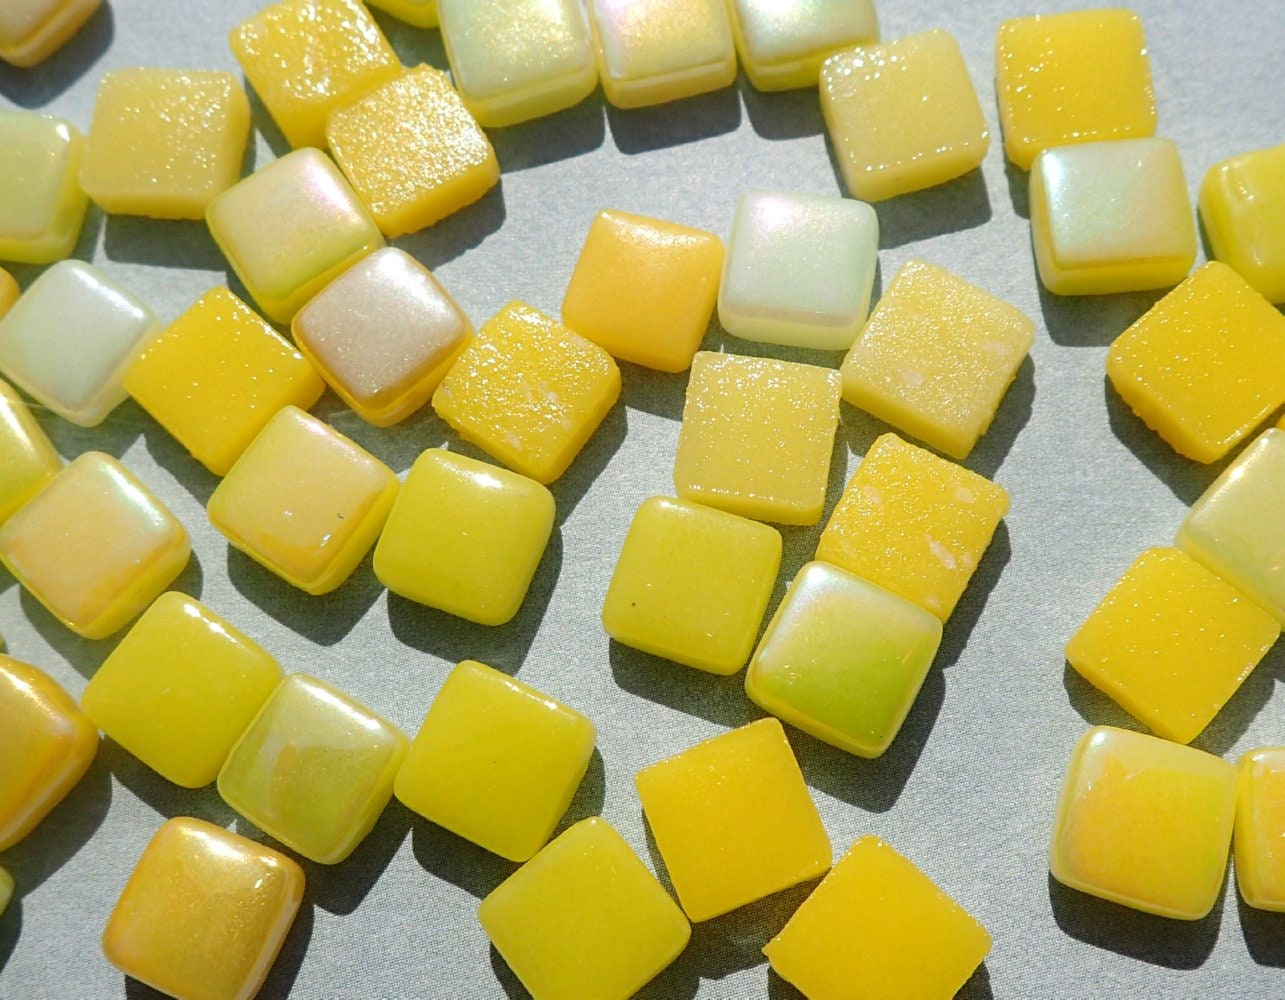 Ripe Lemons Mix Mini Glass Tiles - 8mm Square - 50 grams Opaque Glass Solid Color Mix of Bright and Pale Yellow Iridescent and Matte Tiles